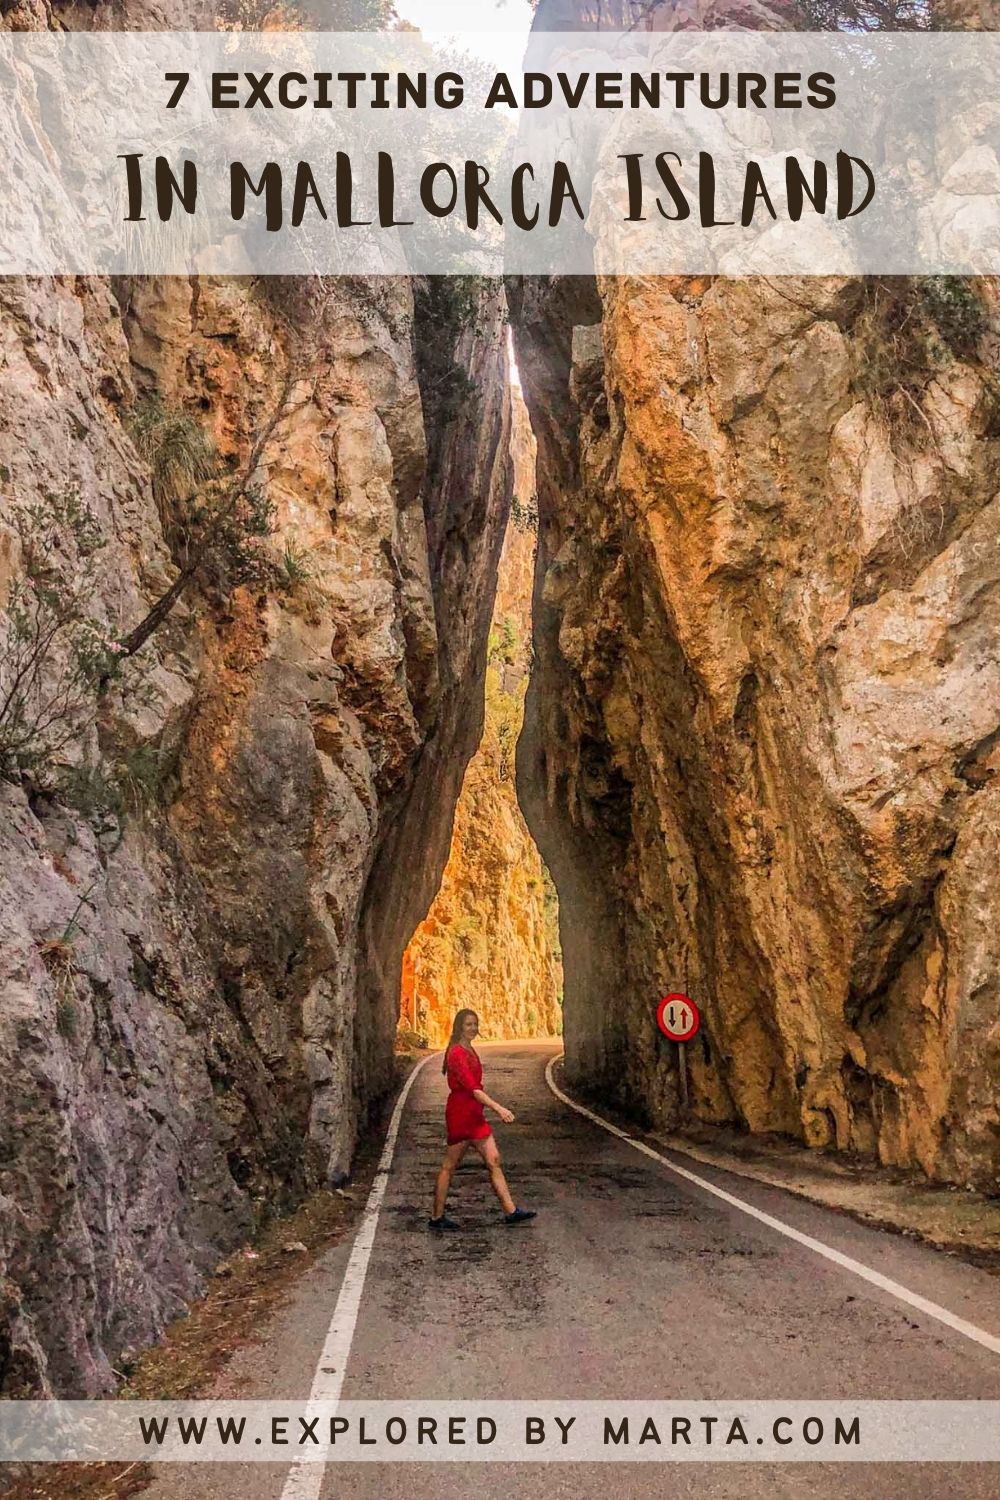 7 exciting adventures in Mallorca island